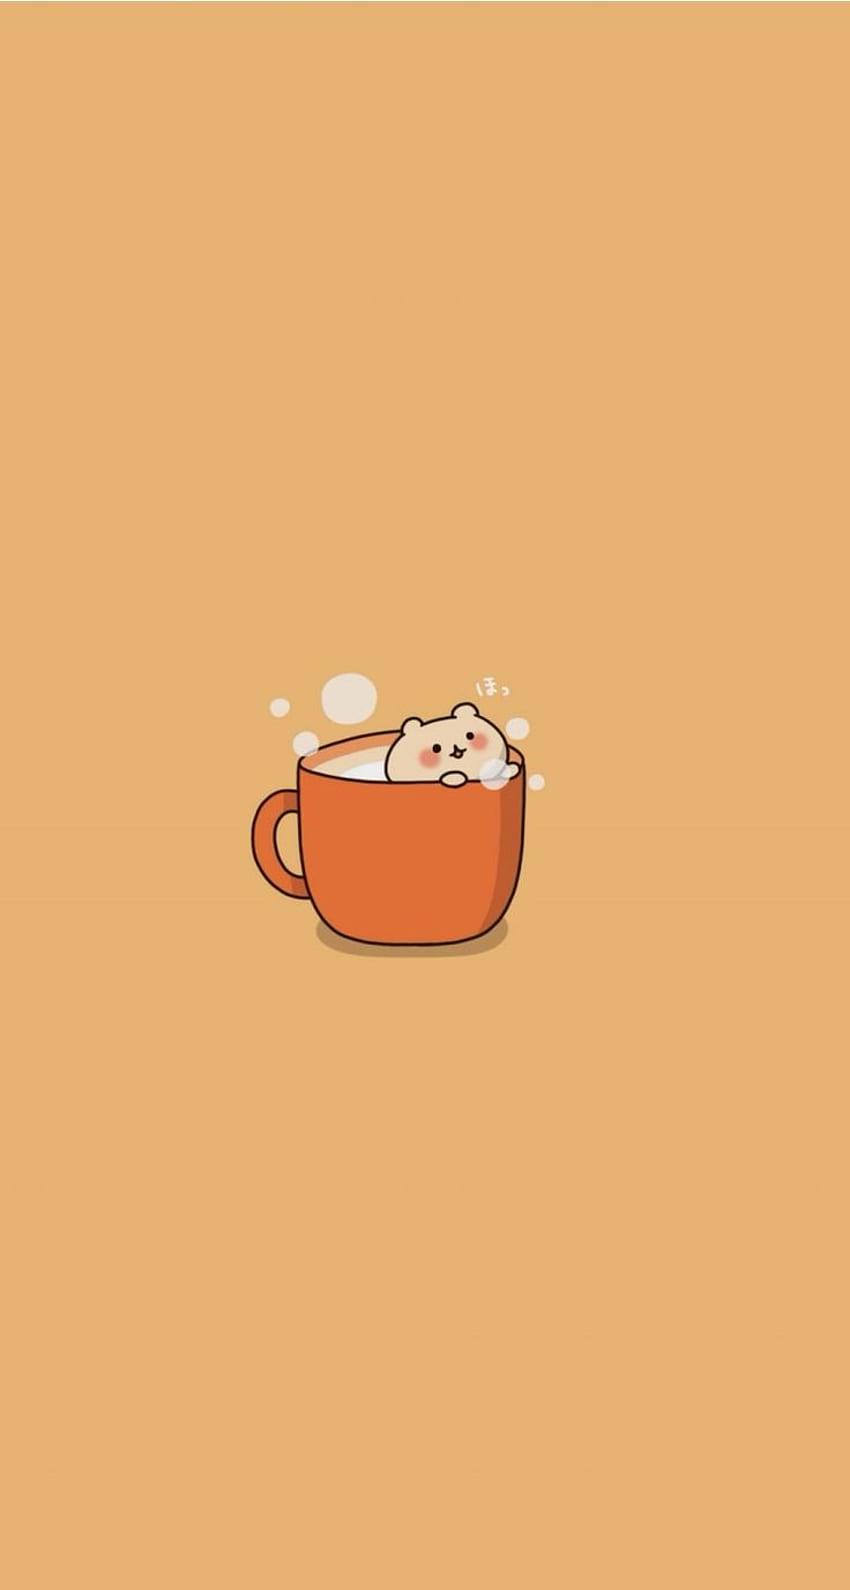 Background Ideas About Cute For iPhone With Cartoon High, Orange Cartoon HD phone wallpaper